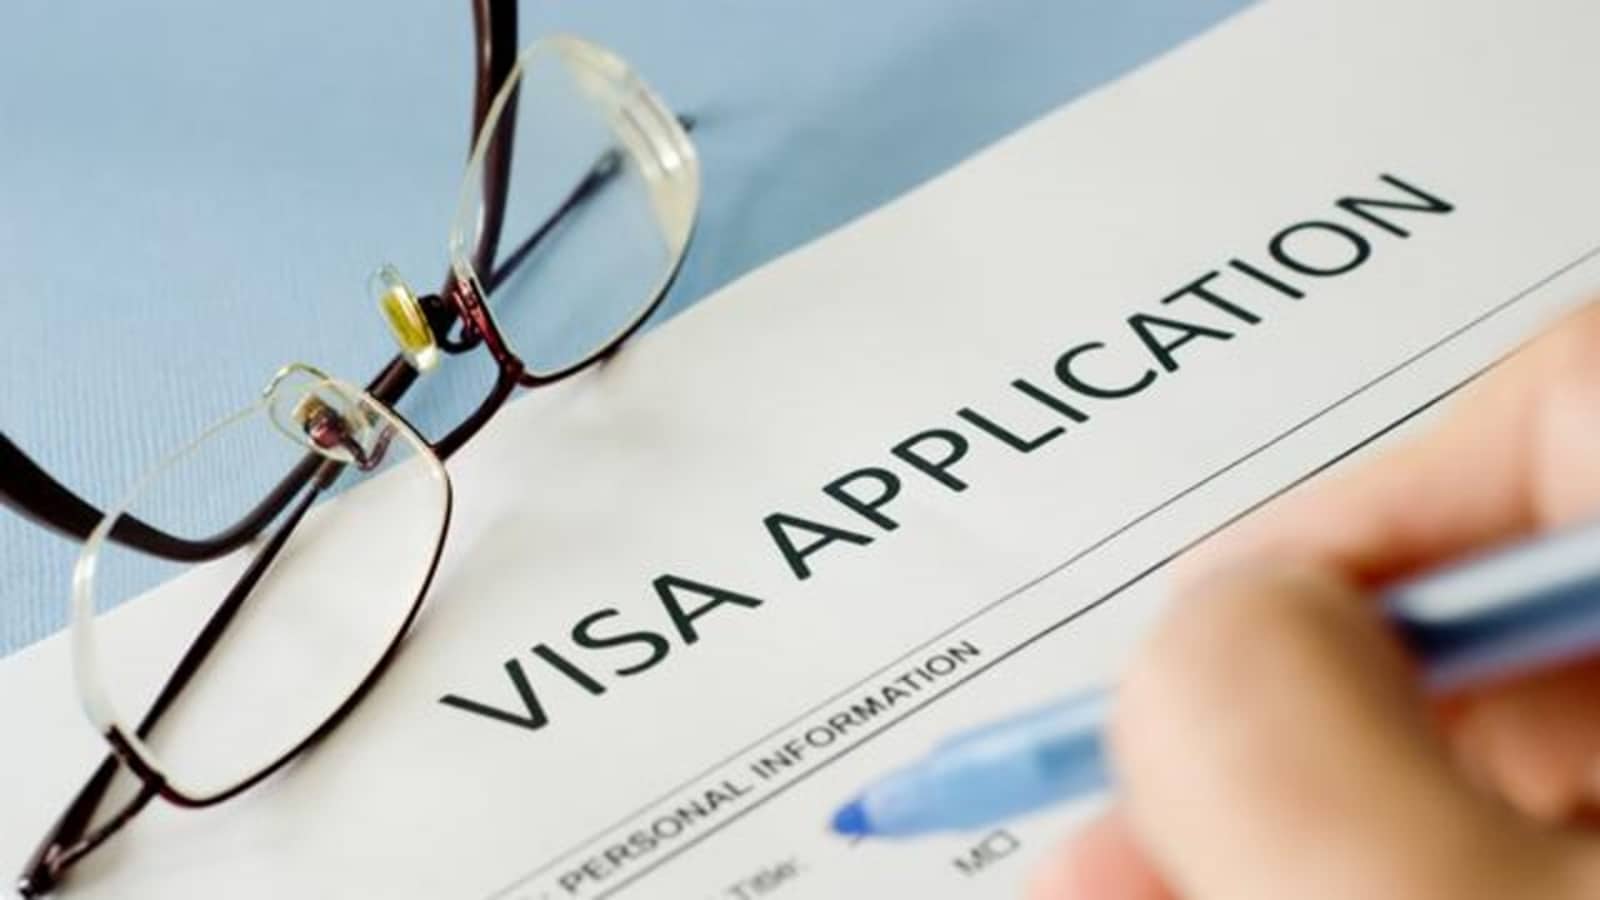 Australia raises visa application fees for international students by 125% to slow migration